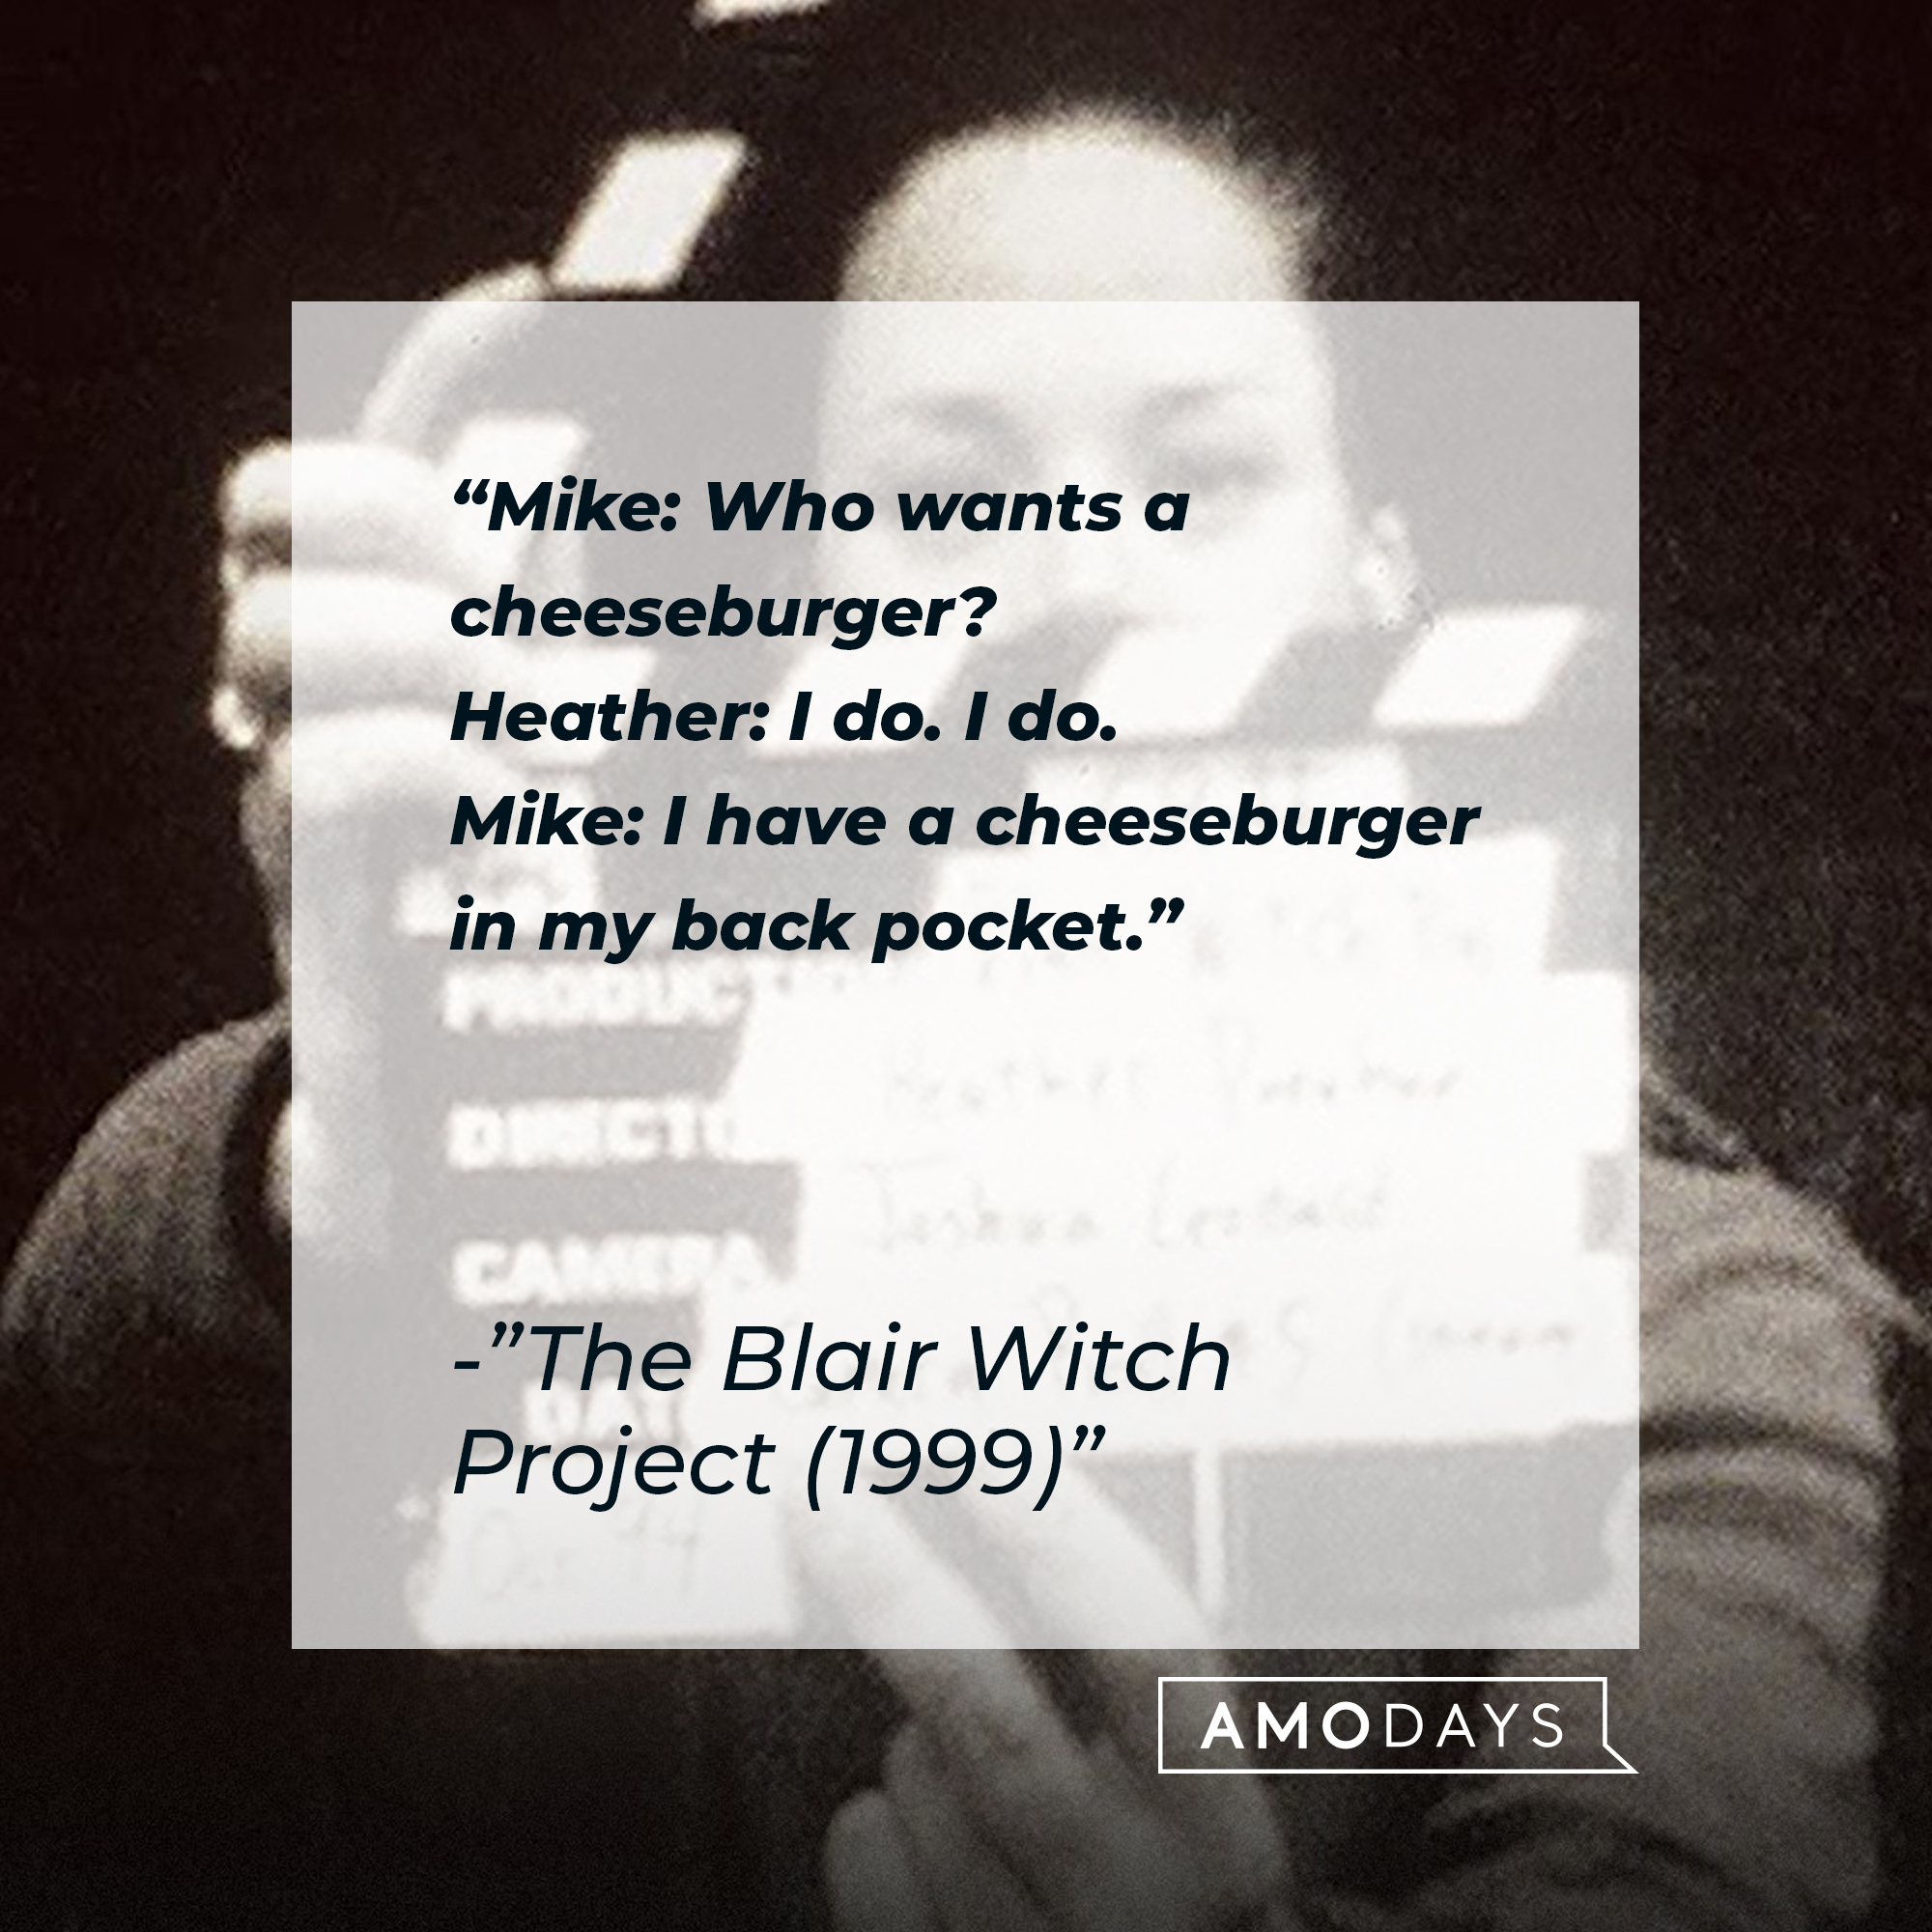 “The Blair Witch Project (1999)” dialogue: “Mike: Who wants a cheeseburger? Heather: I do. I do. Mike: I have a cheeseburger in my back pocket.” | Source: facebook.com/blairwitchmovie